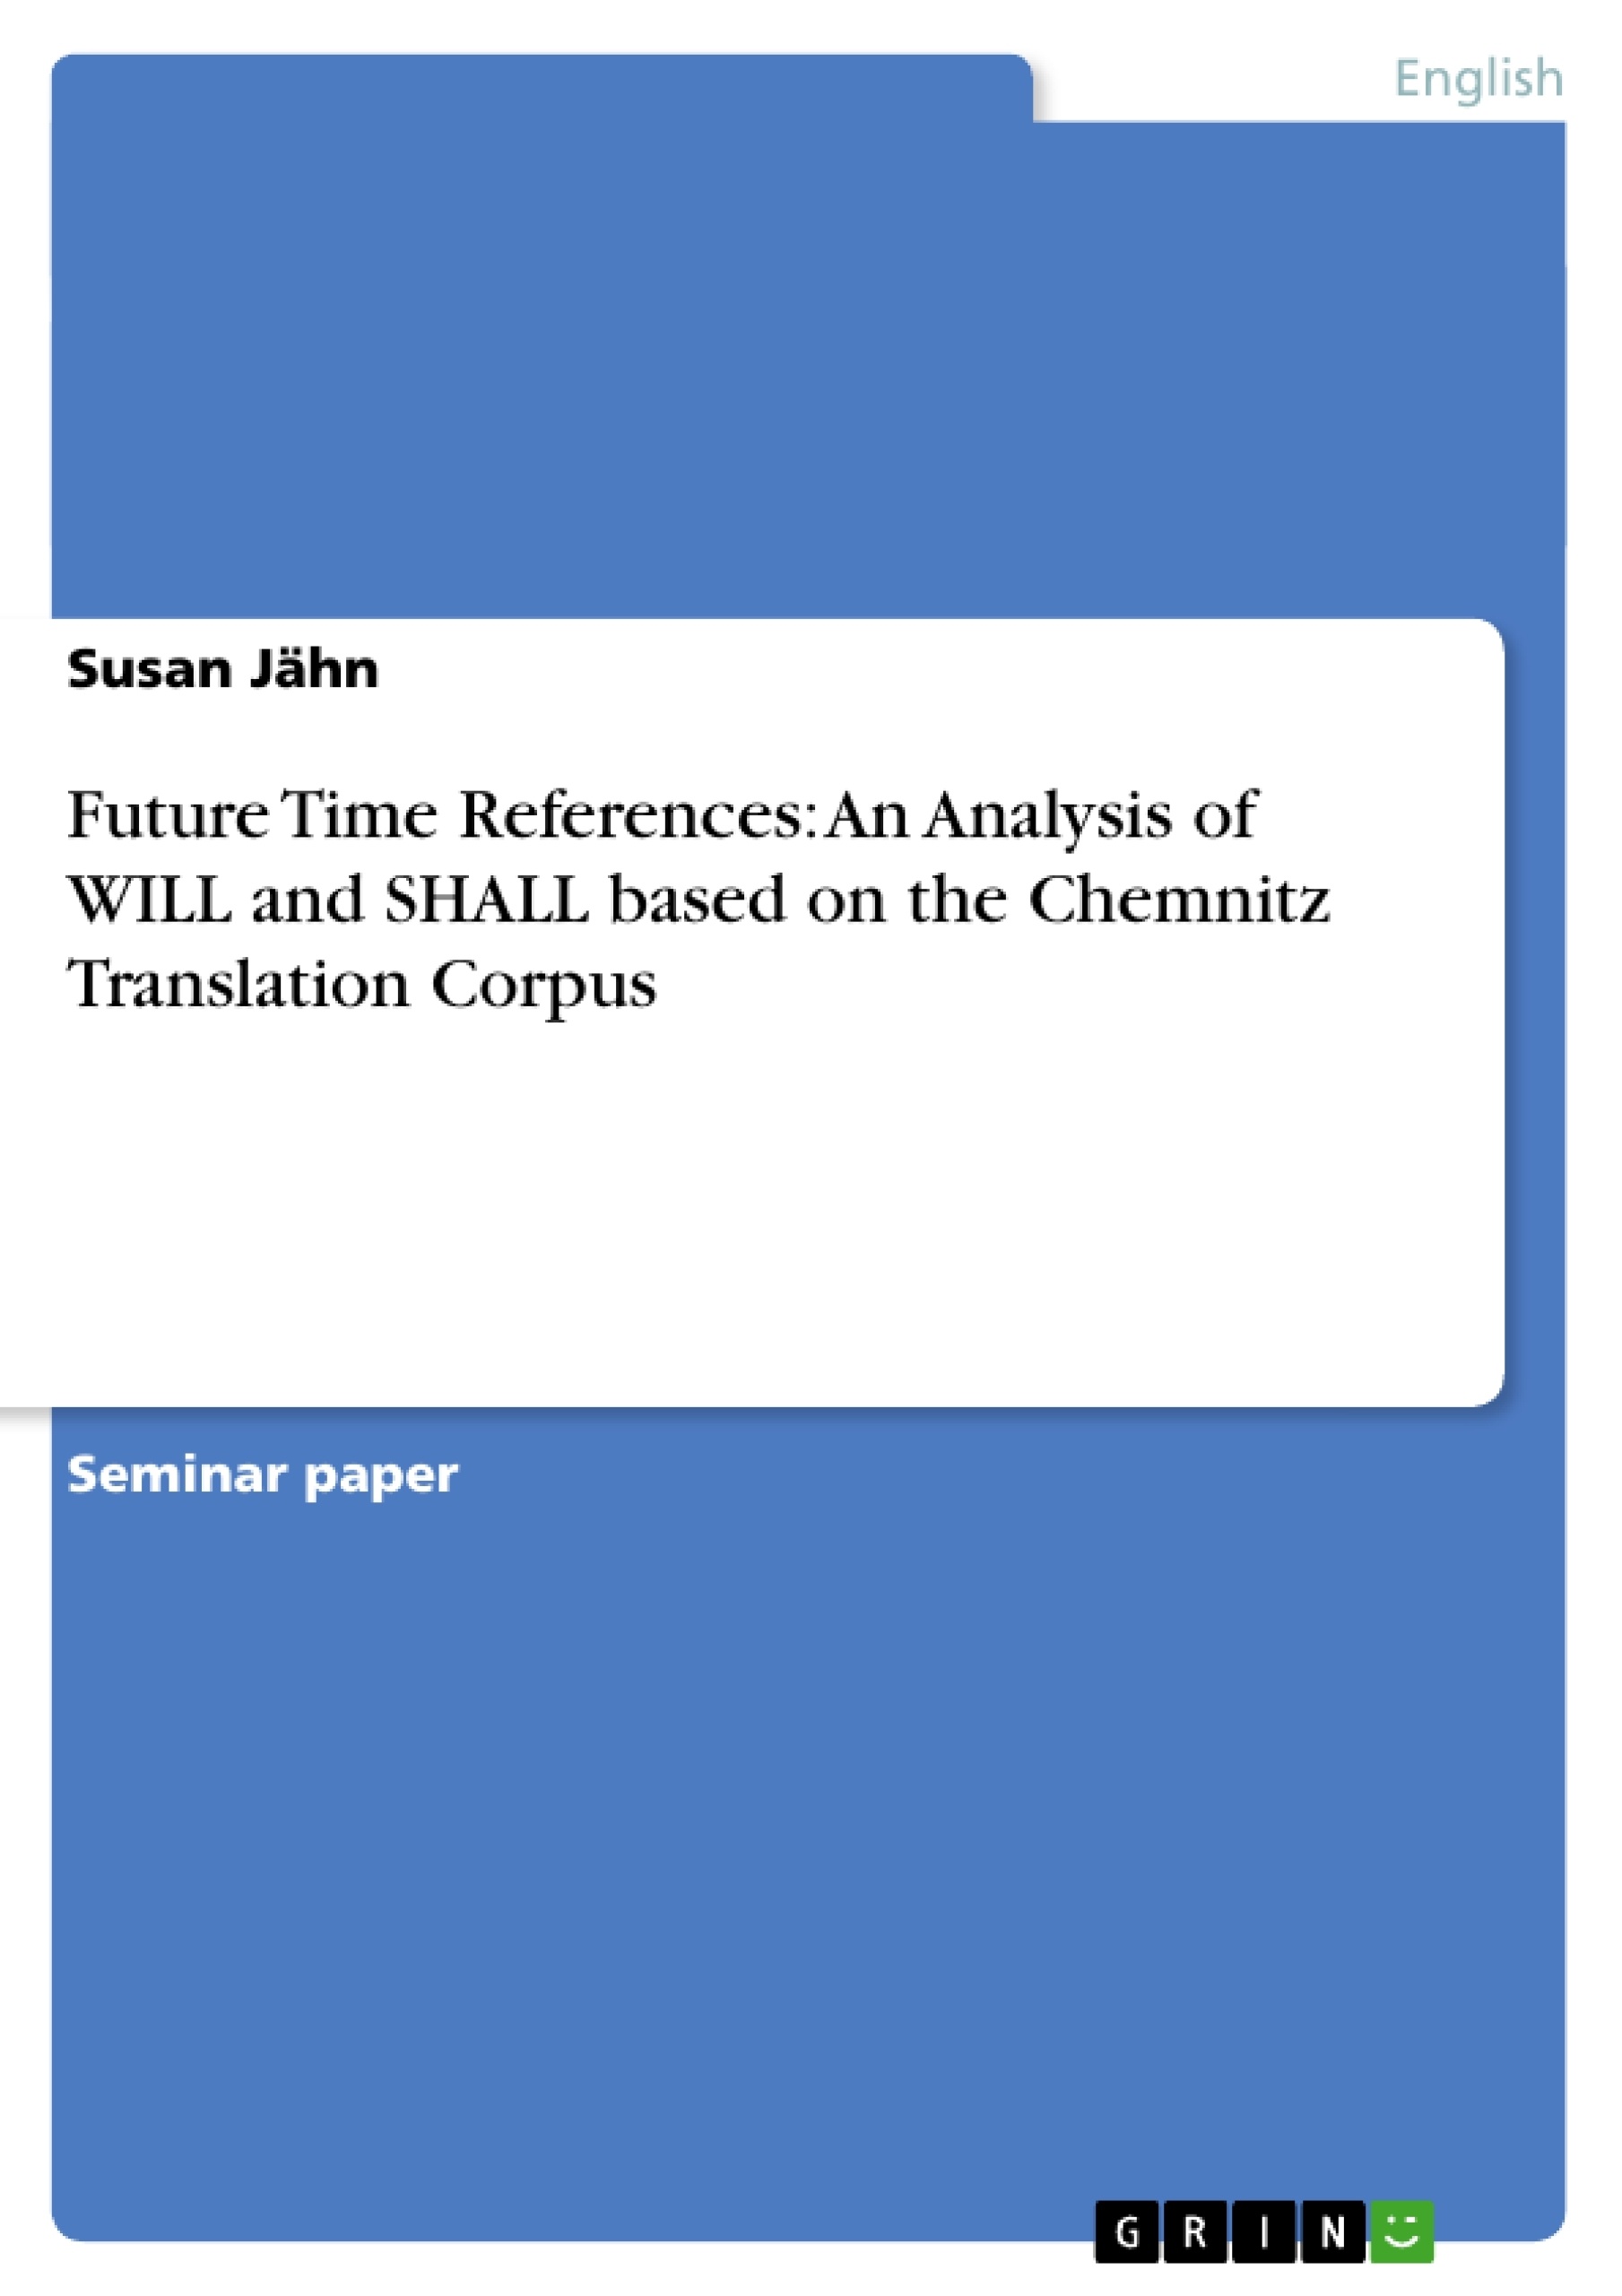 Title: Future Time References: An Analysis of WILL and SHALL based on the Chemnitz Translation Corpus